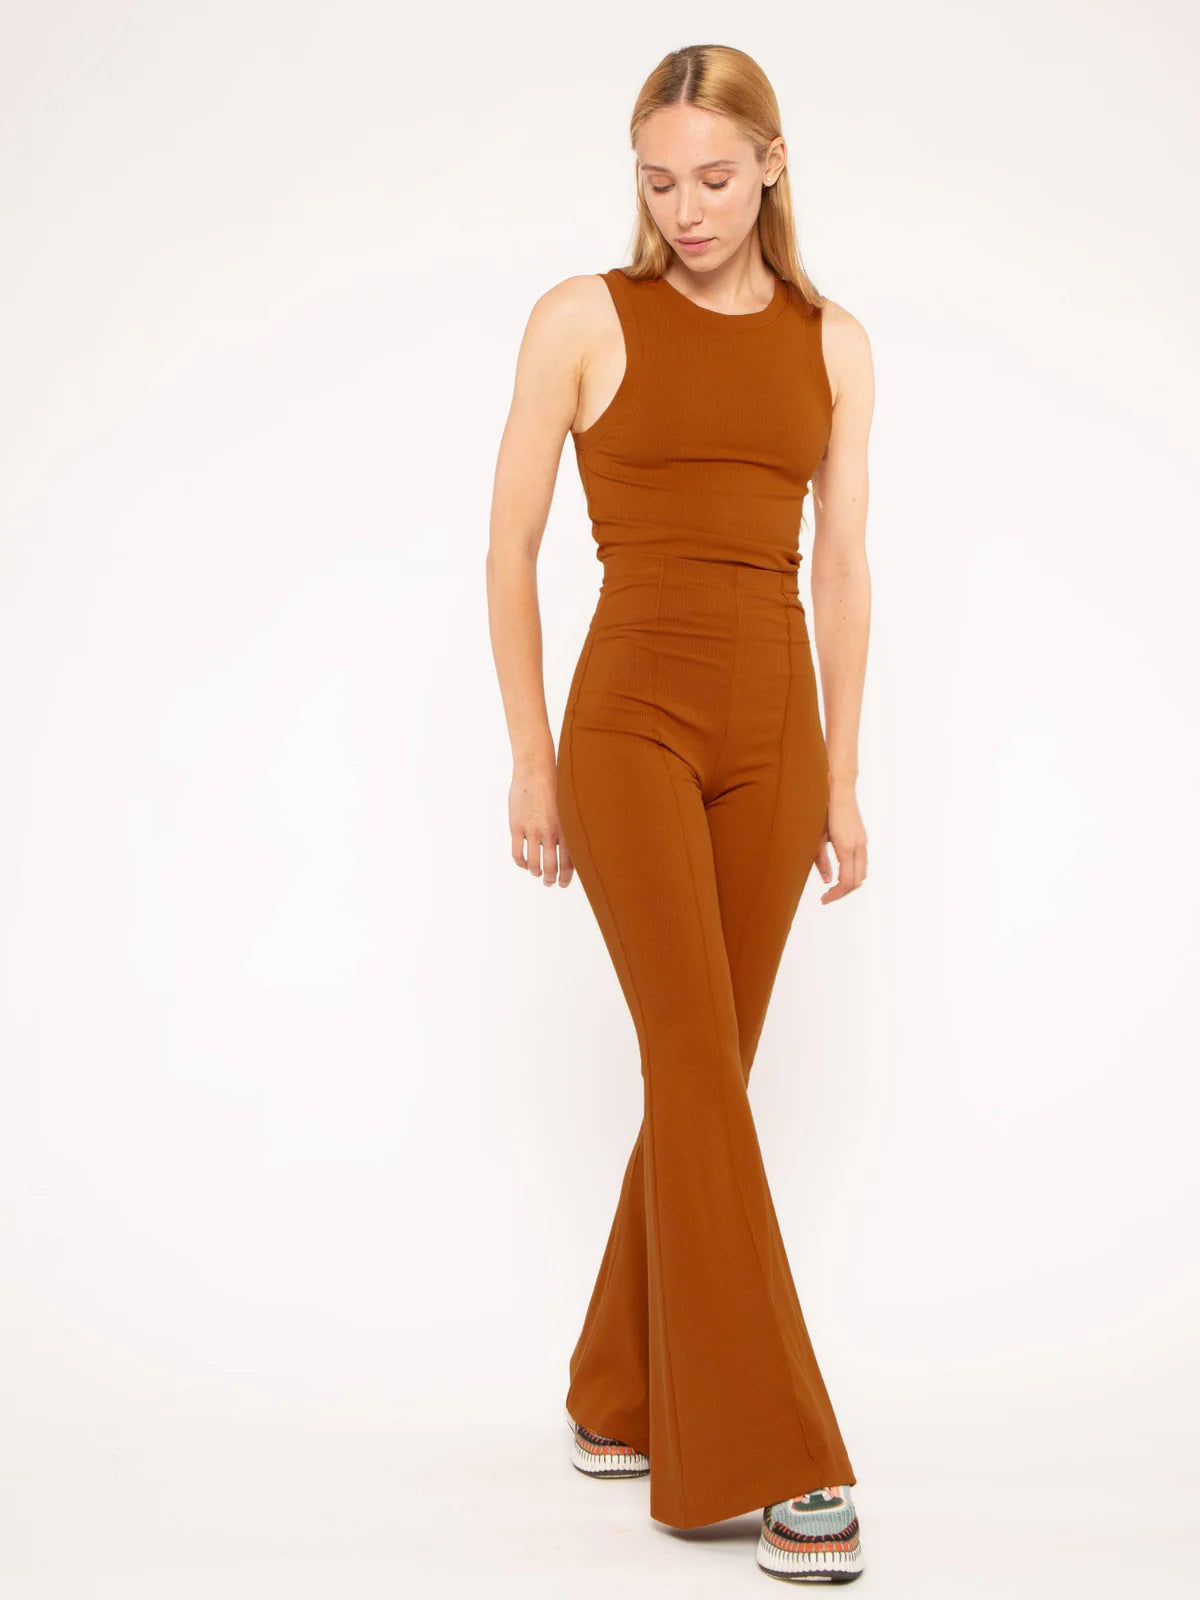 Fitted Rib Tank Top Copper - Ripley Rader